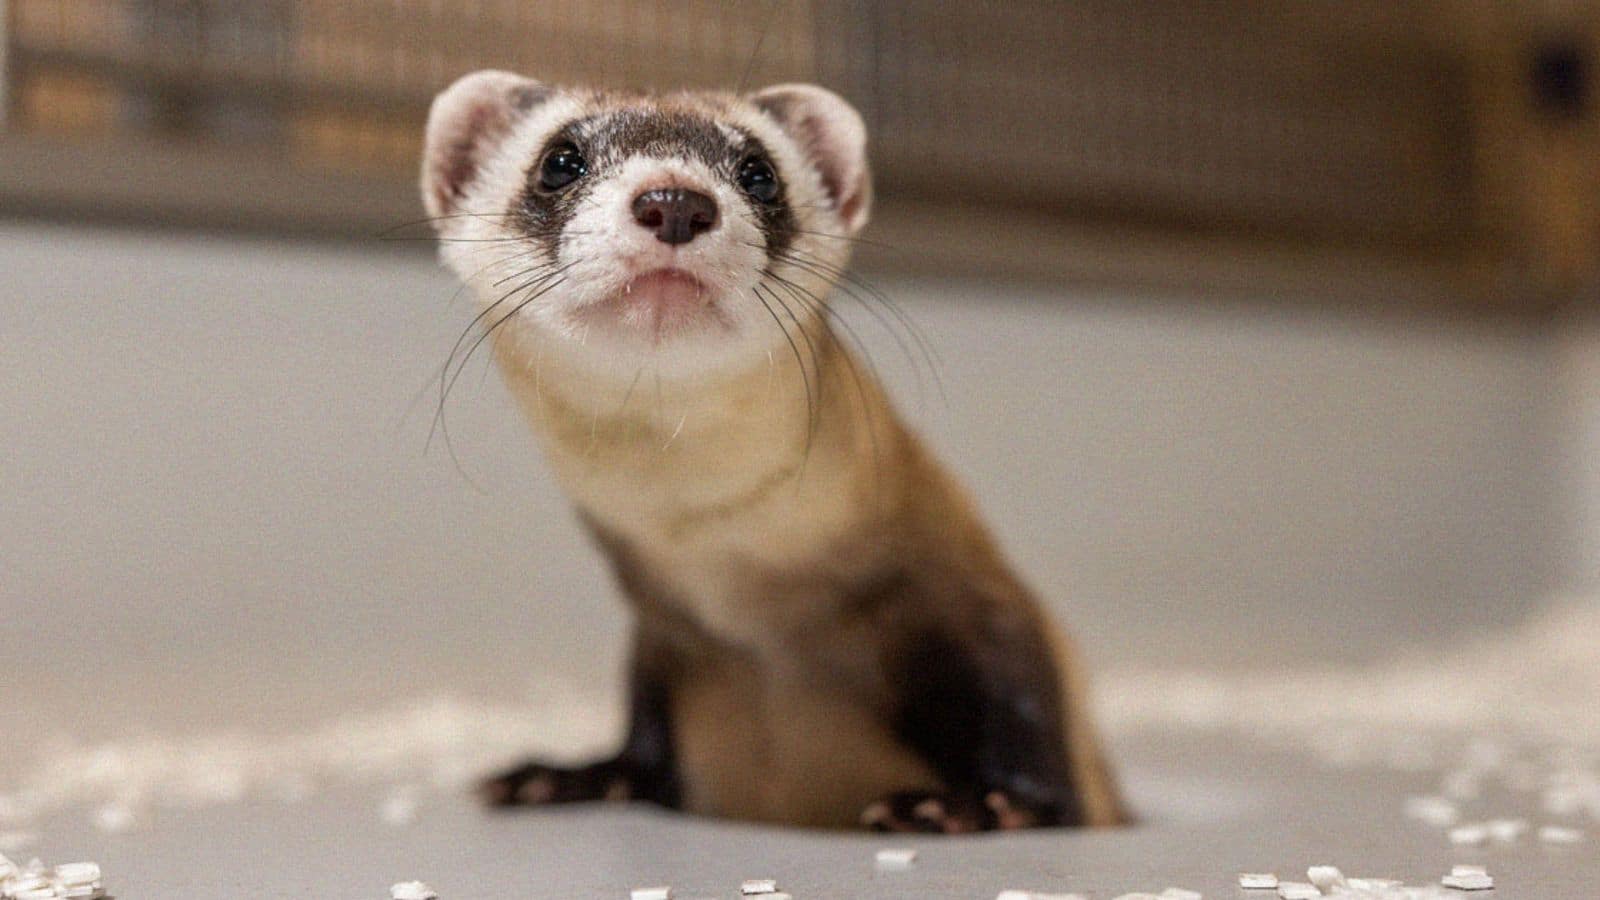 Scientists clone black-footed ferrets from cells dating back to 1988